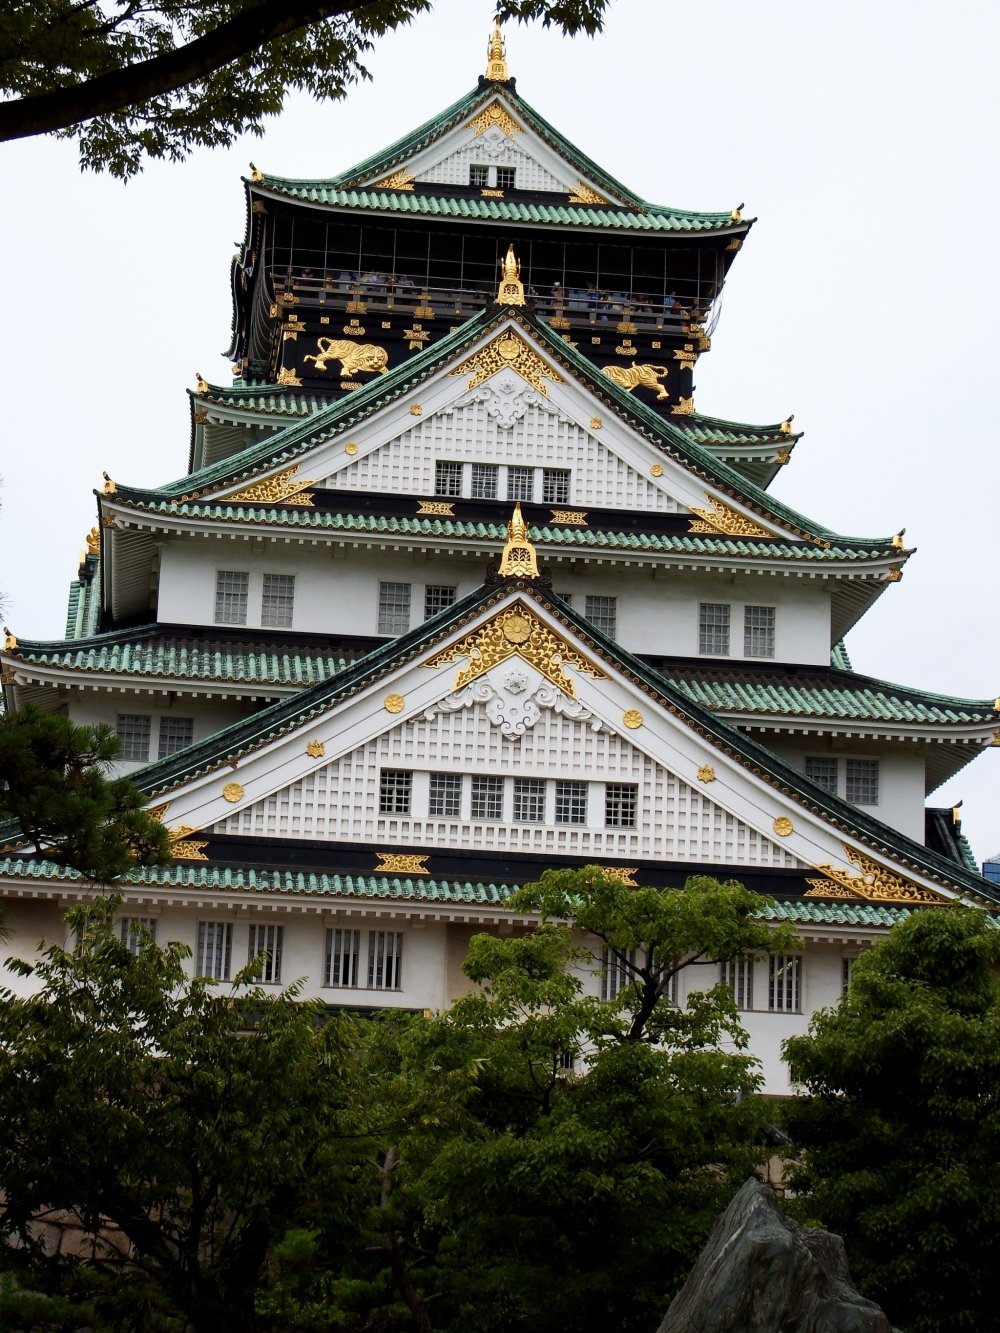 Now, you are finally standing in front of the main tower of Osaka Castle. Let&#39;s look at the magnificent castle closely...